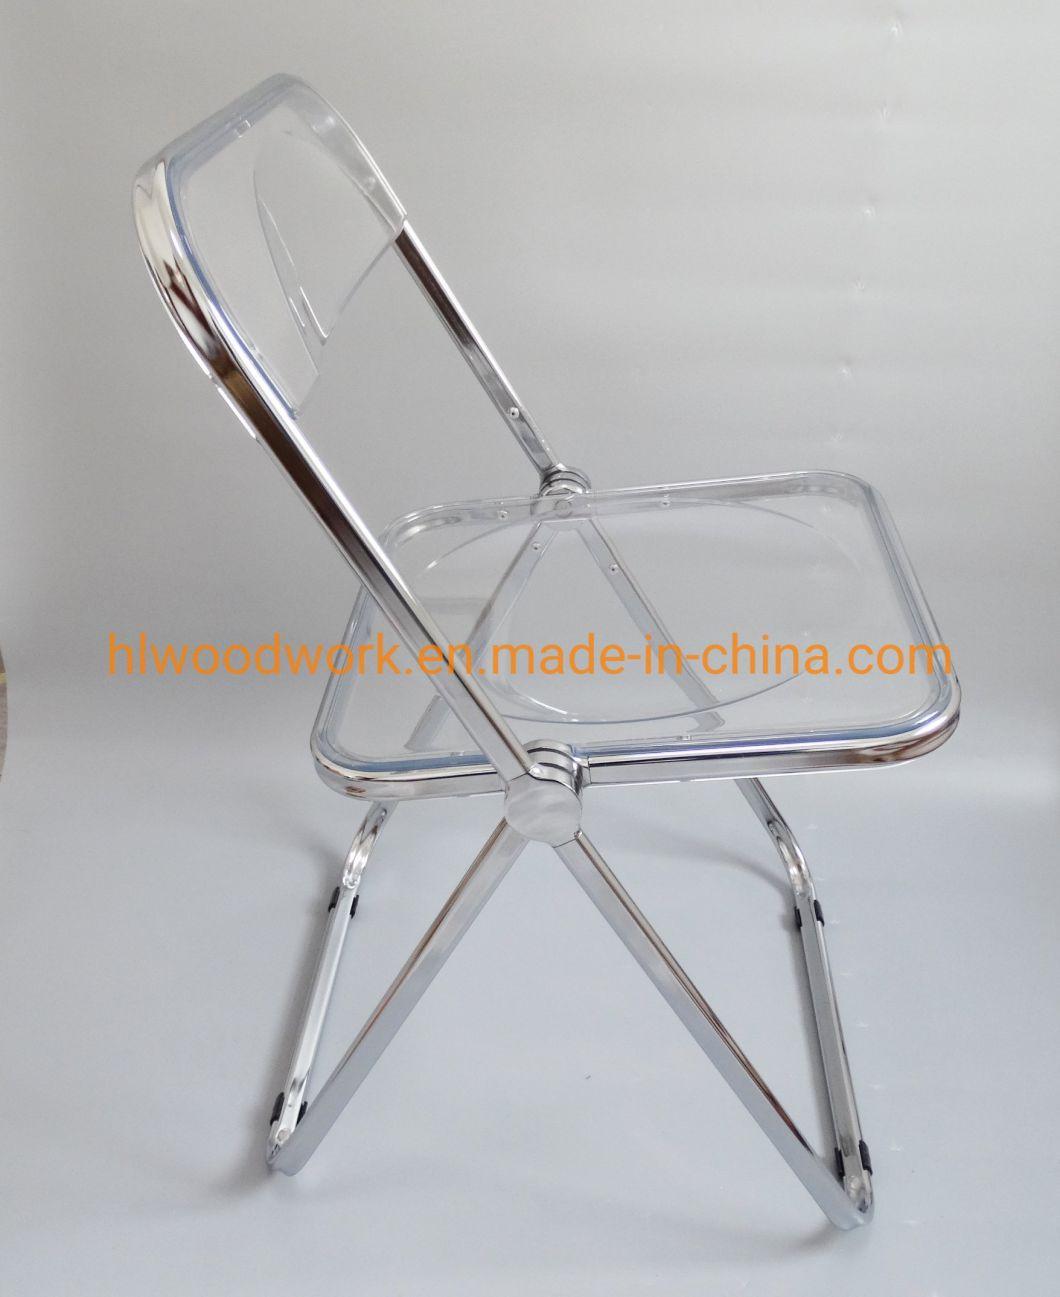 Modern Transparent Red Folding Chair PC Plastic Living Room Seat Chrome Frame Office Bar Dining Leisure Banquet Wedding Meeting Chair Plastic Dining Chair